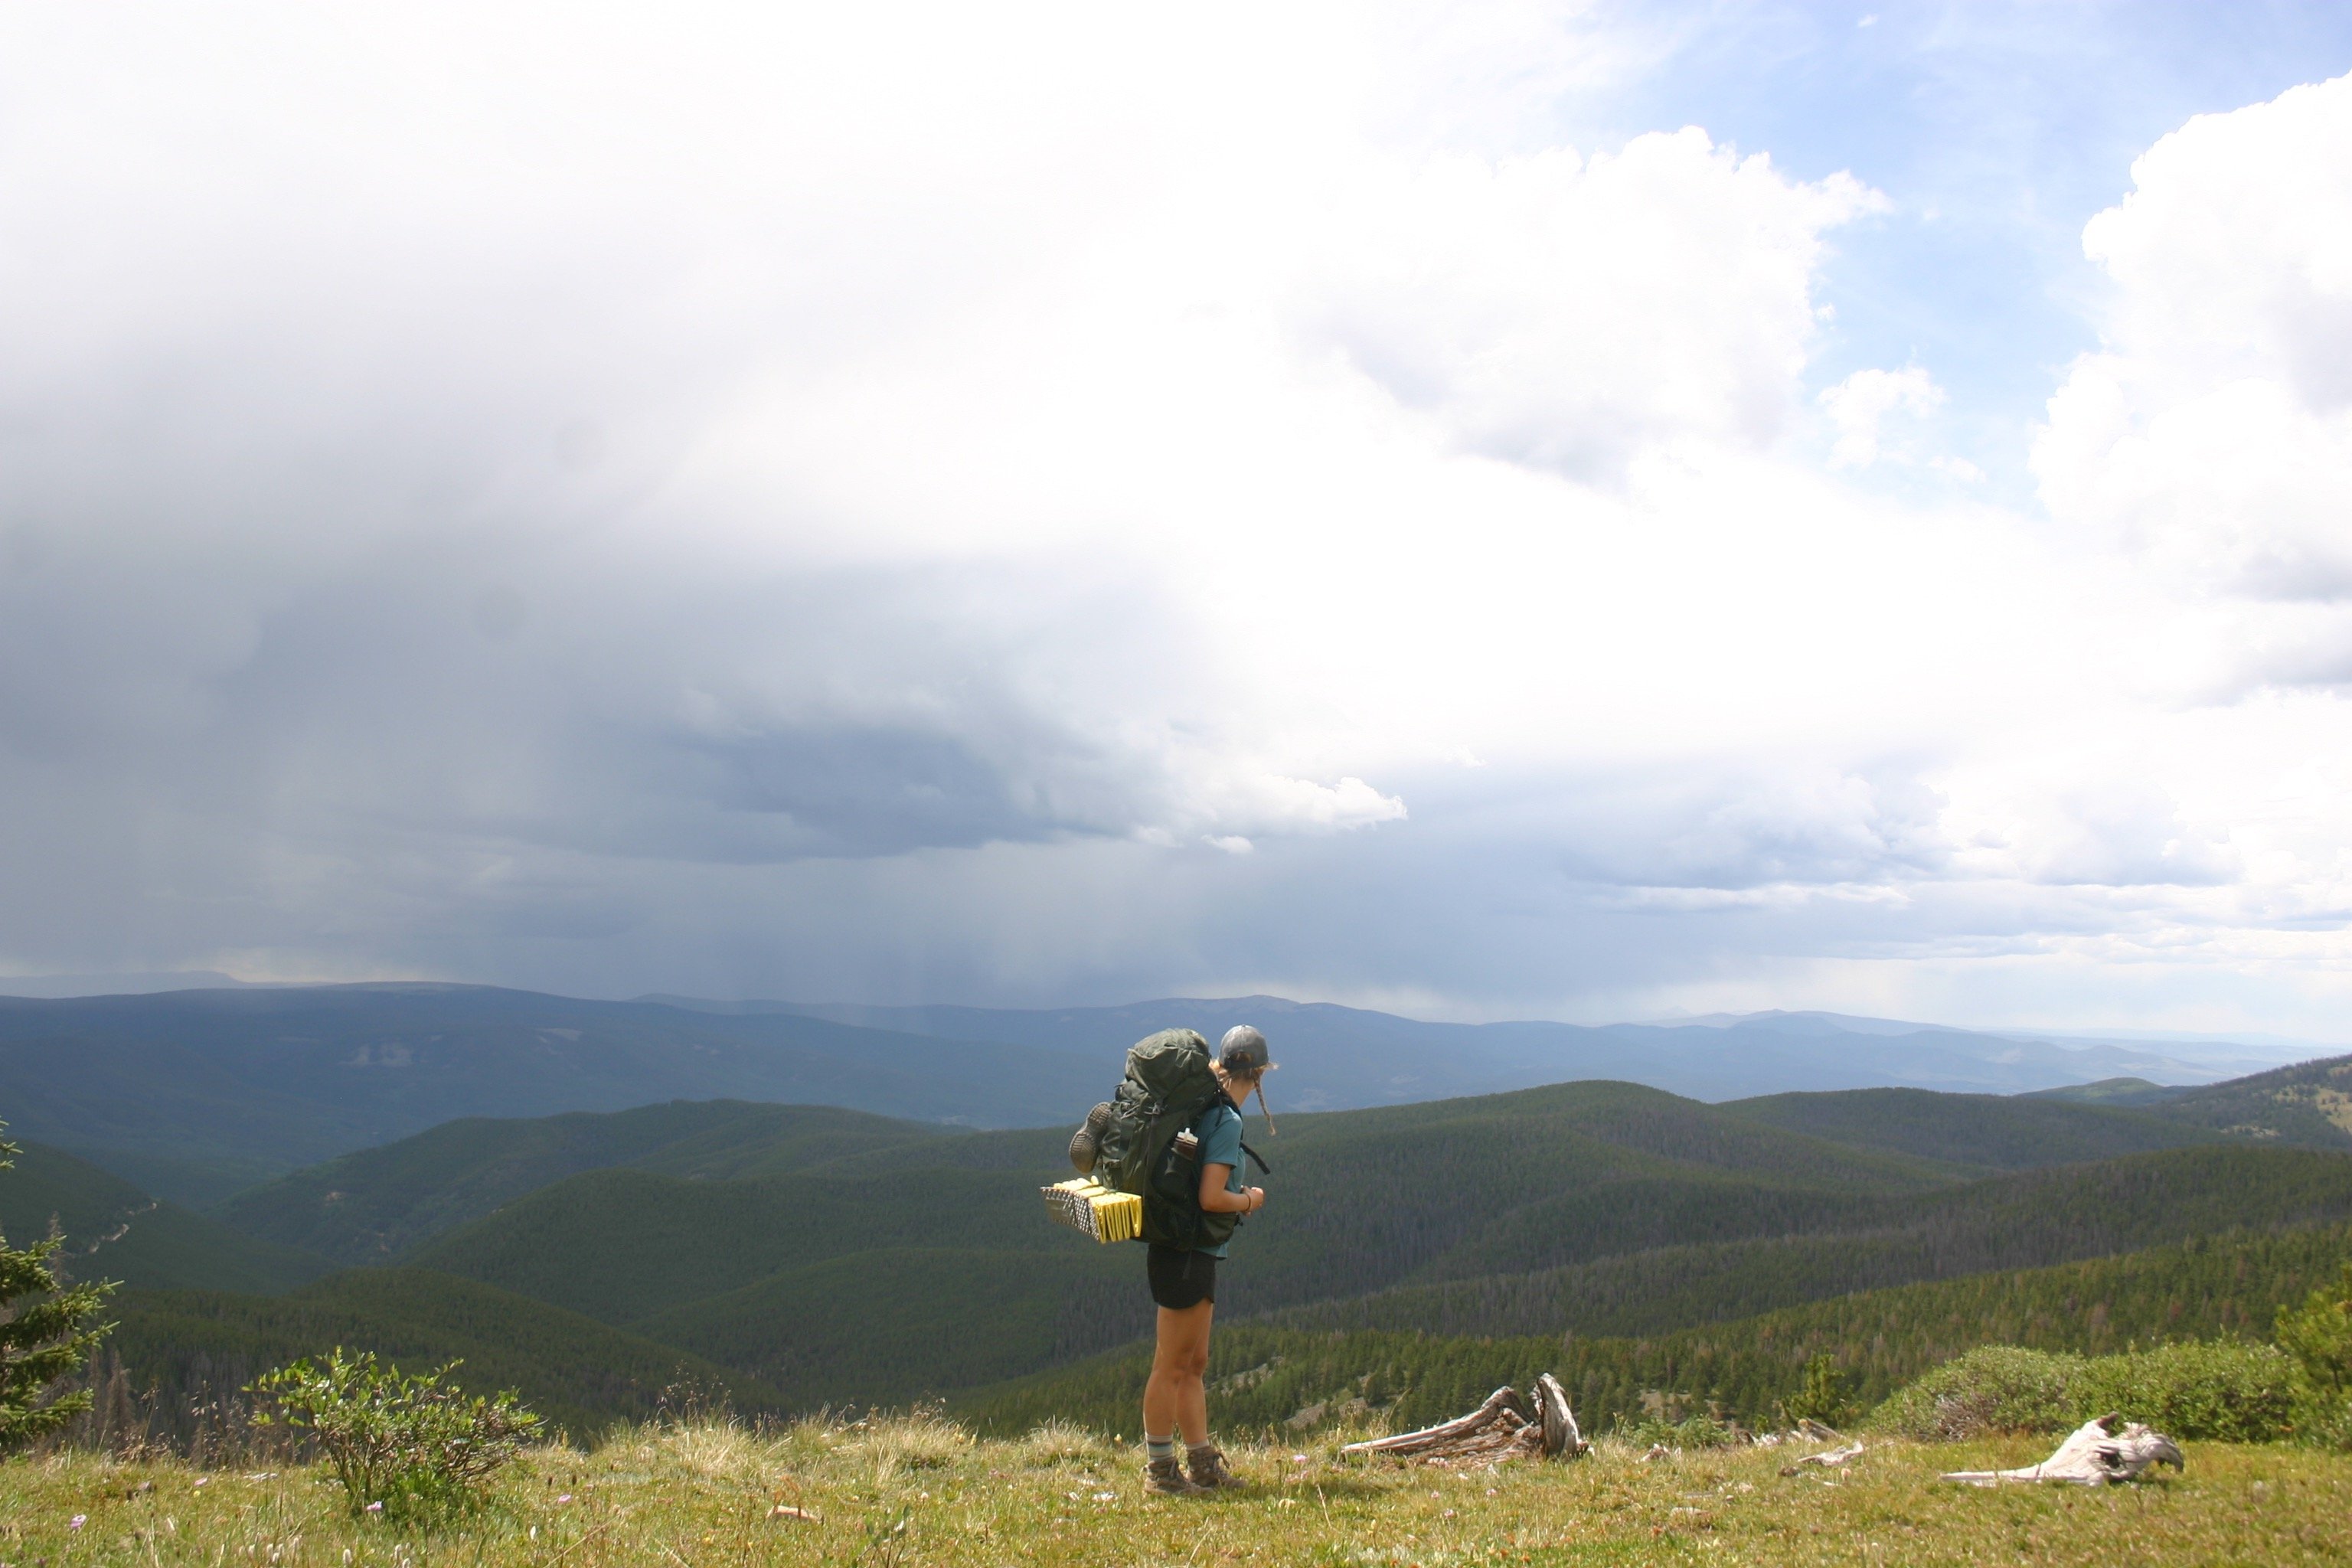 Kenna Kuhn overlooks a mountain valley while backpacking